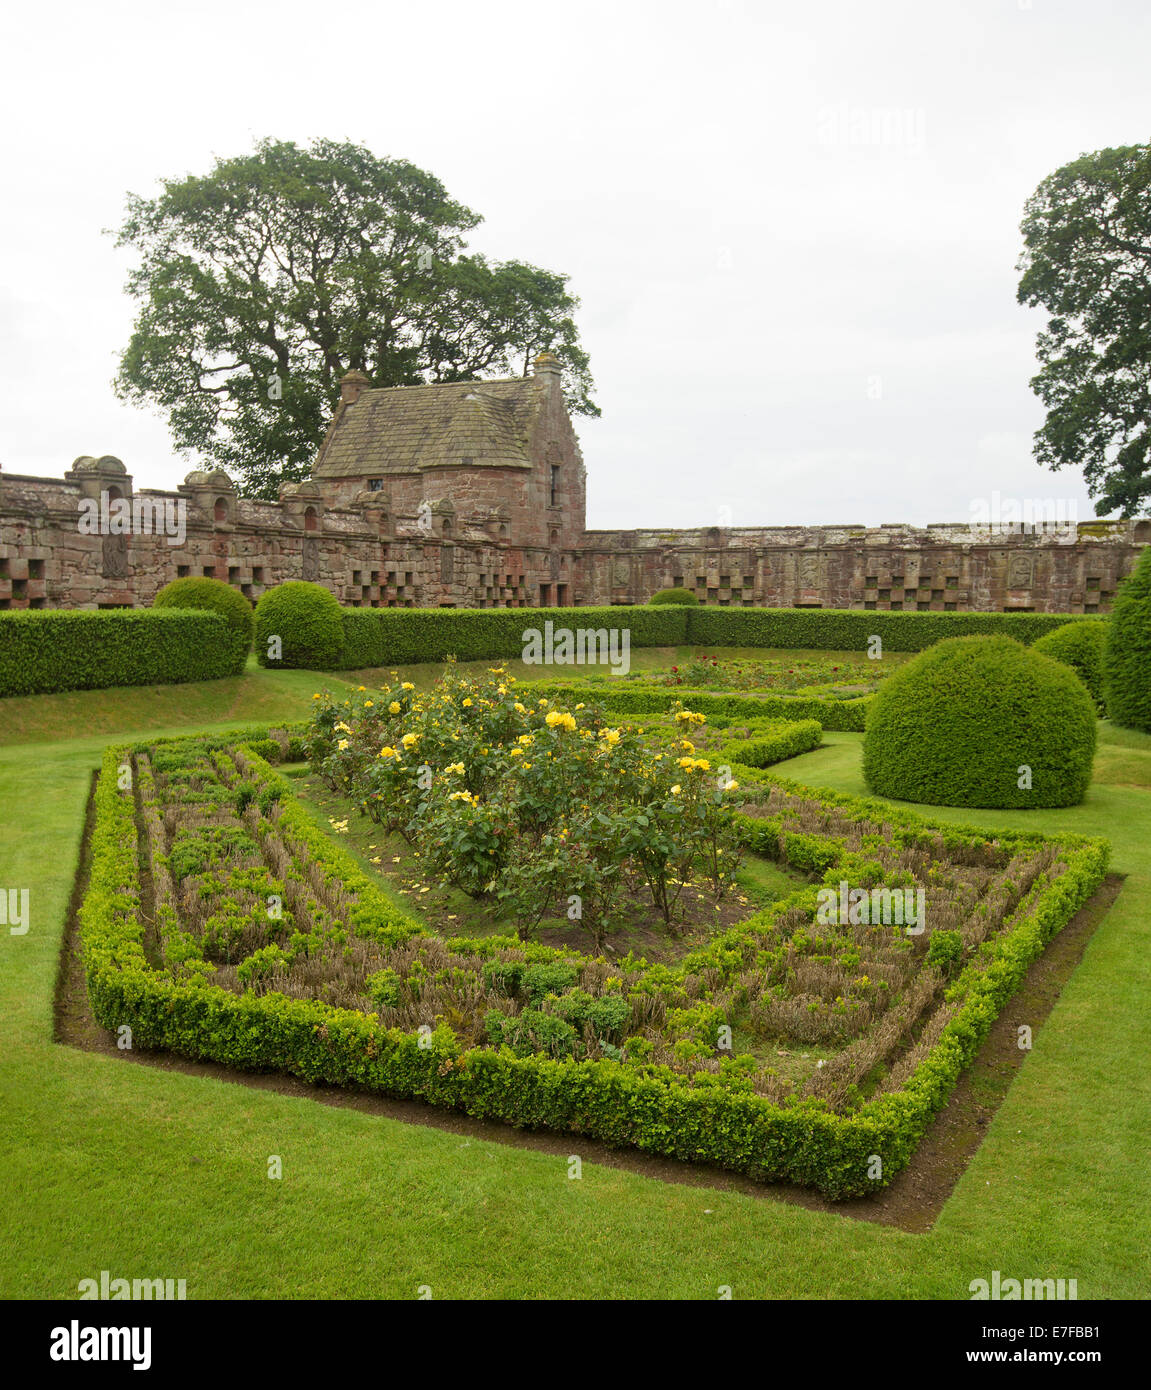 Elegant formal walled garden with low yew hedges in intricate geometric designs and yellow flowering roses at historic Edzell castle in Scotland Stock Photo